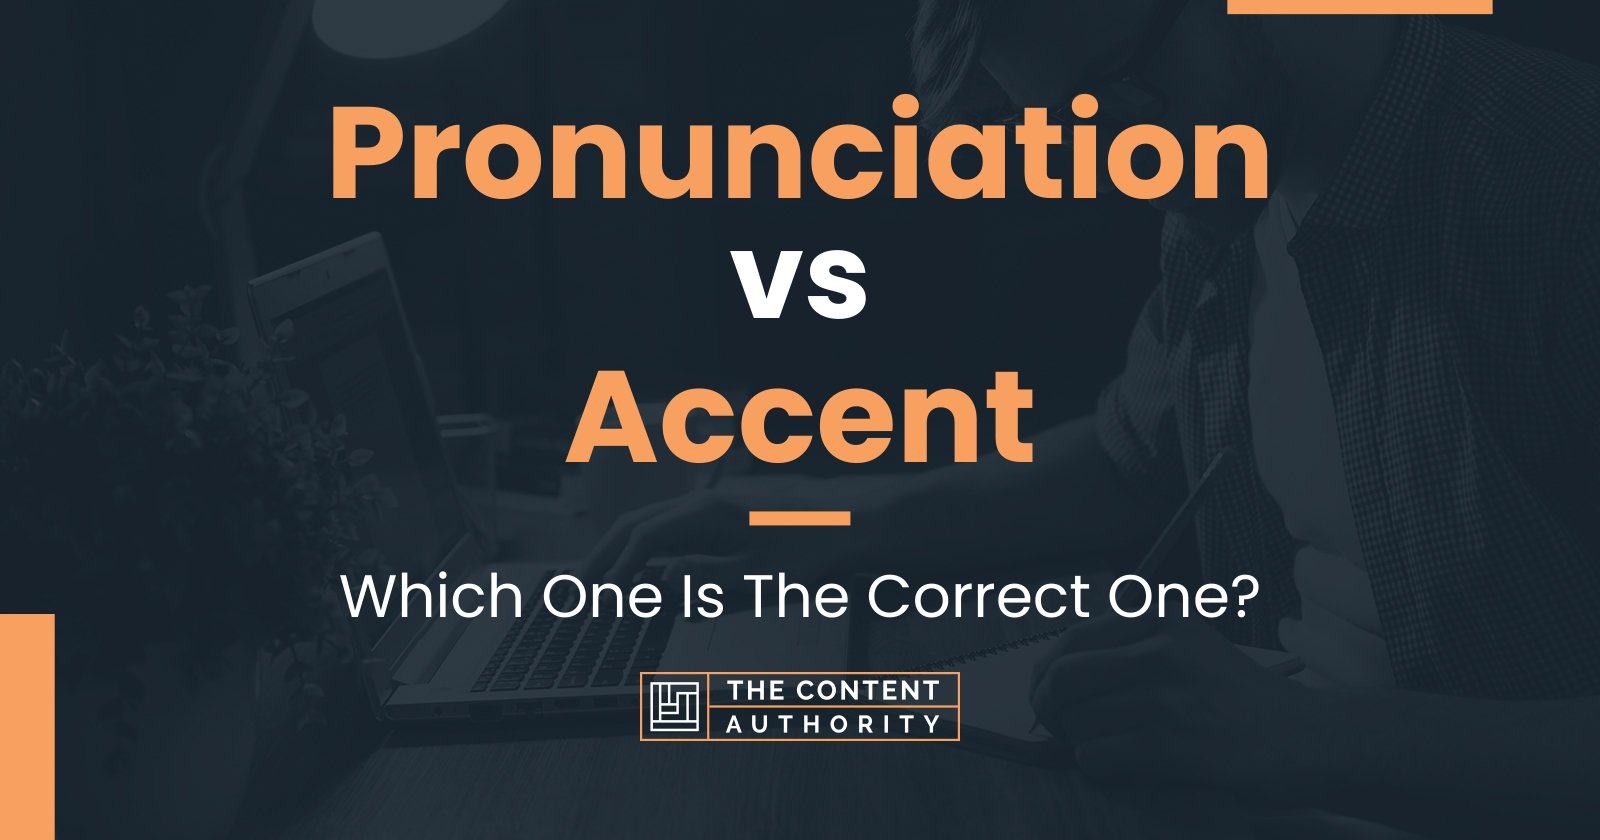 Pronunciation vs Accent: Which One Is The Correct One?